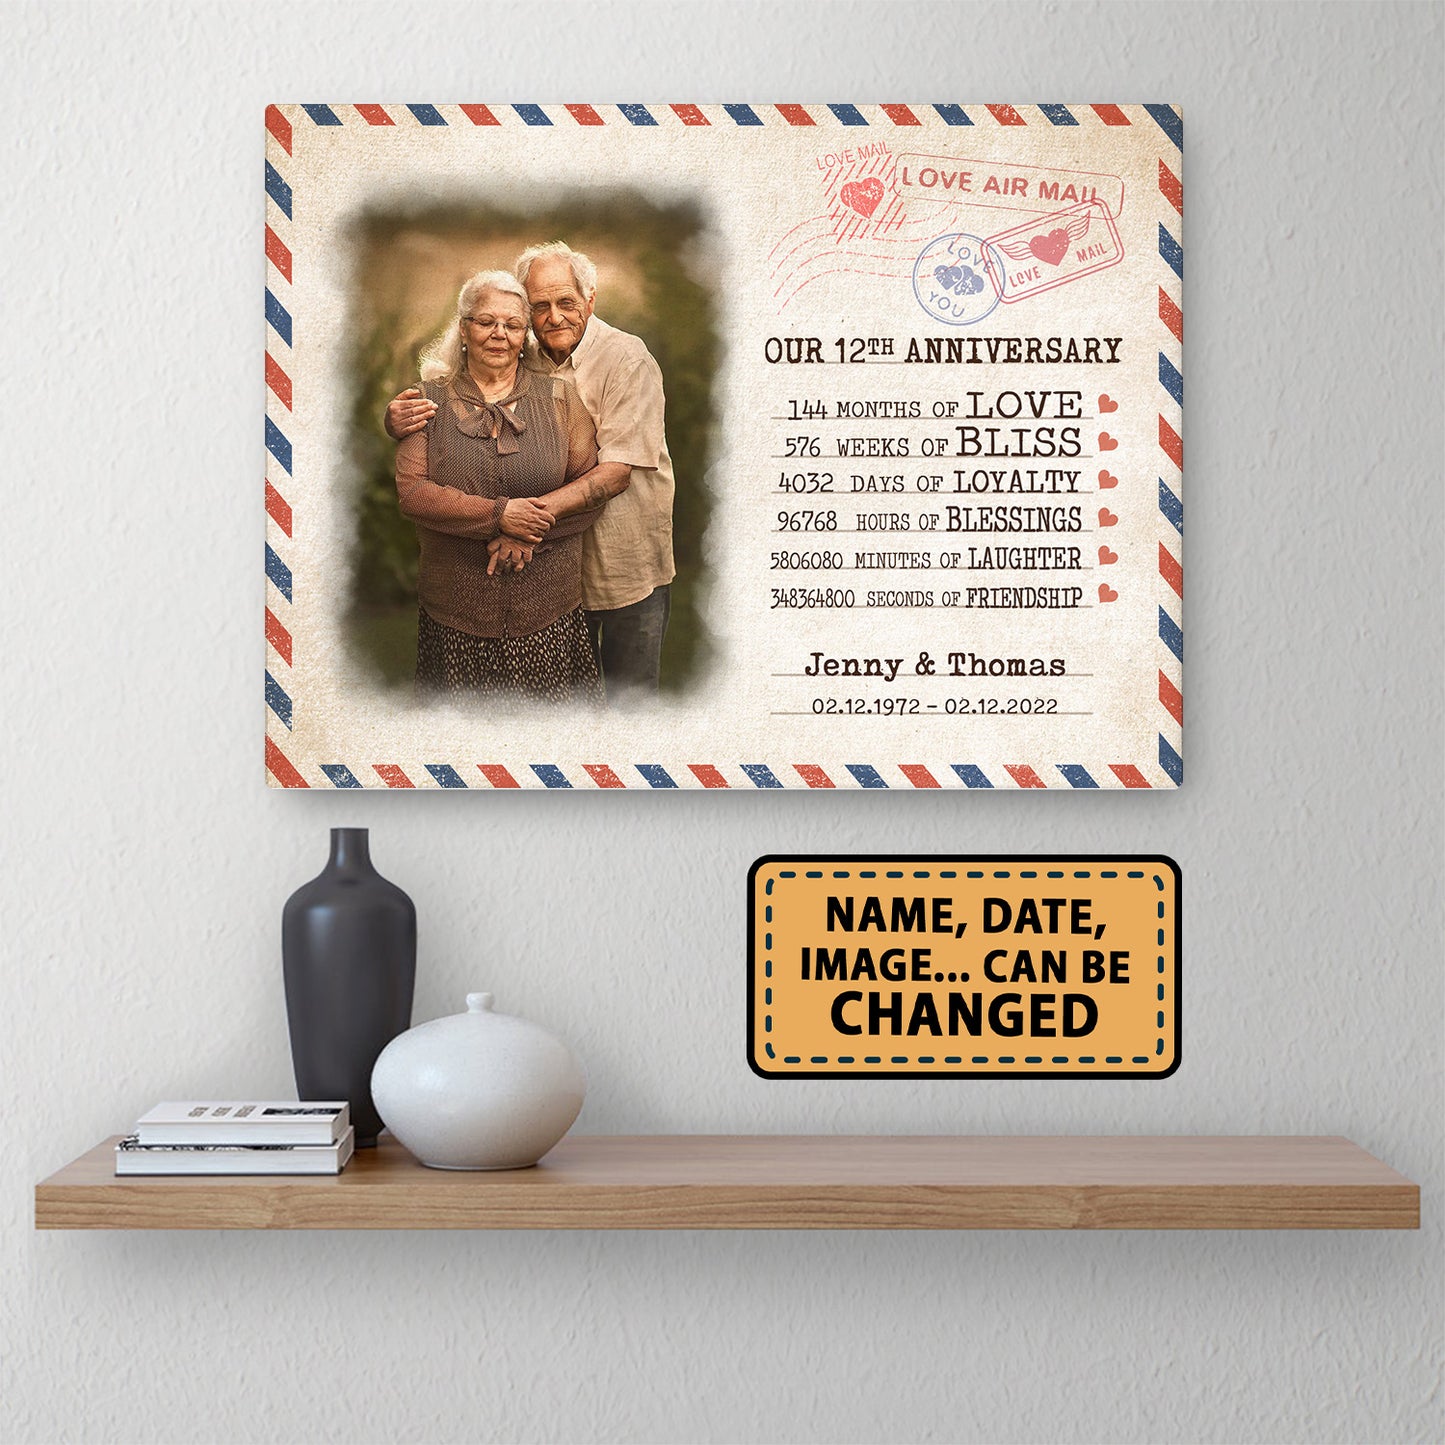 Our 12th Anniversary Letter Valentine Gift Personalized Canvas